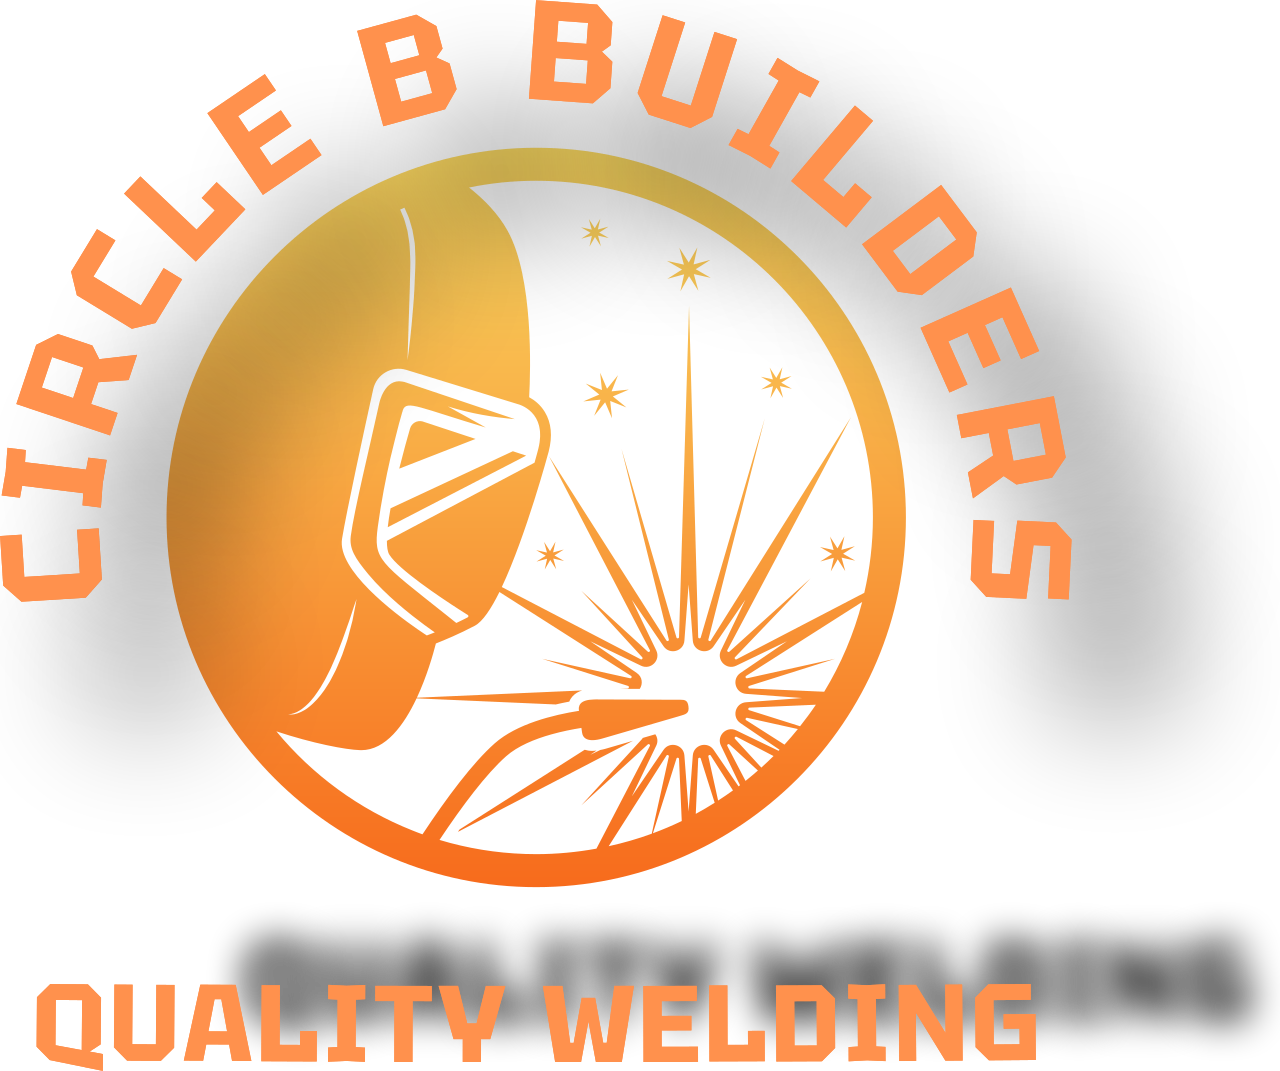 CIRCLE B BUILDERS's web page